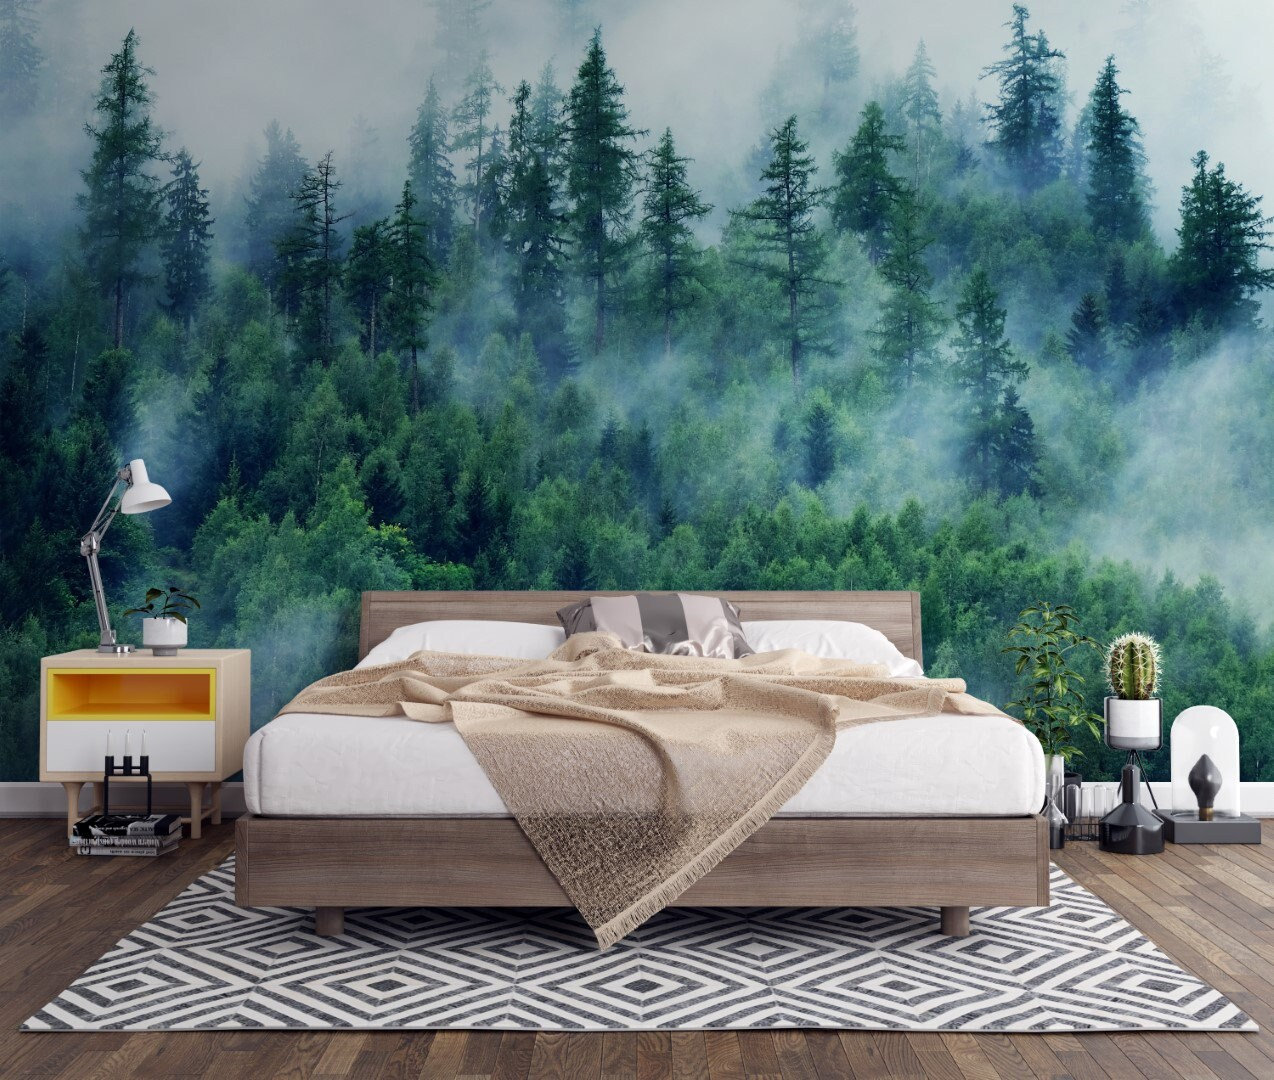 A bedroom with a forest mural on the wall. - Foggy forest